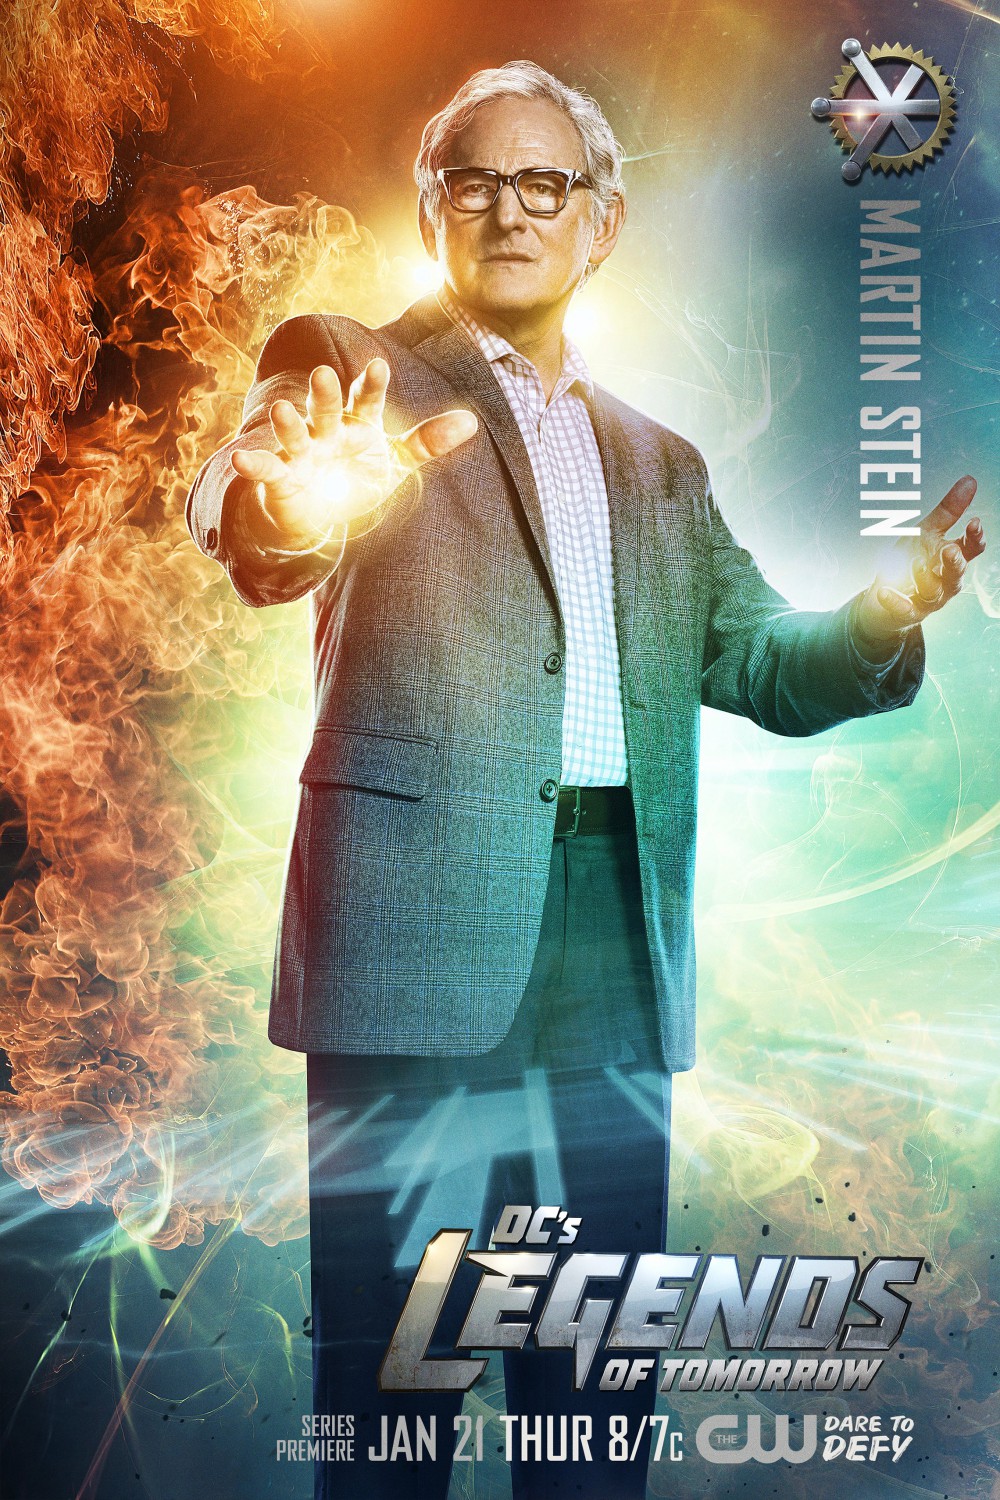 Extra Large TV Poster Image for Legends of Tomorrow (#3 of 28)